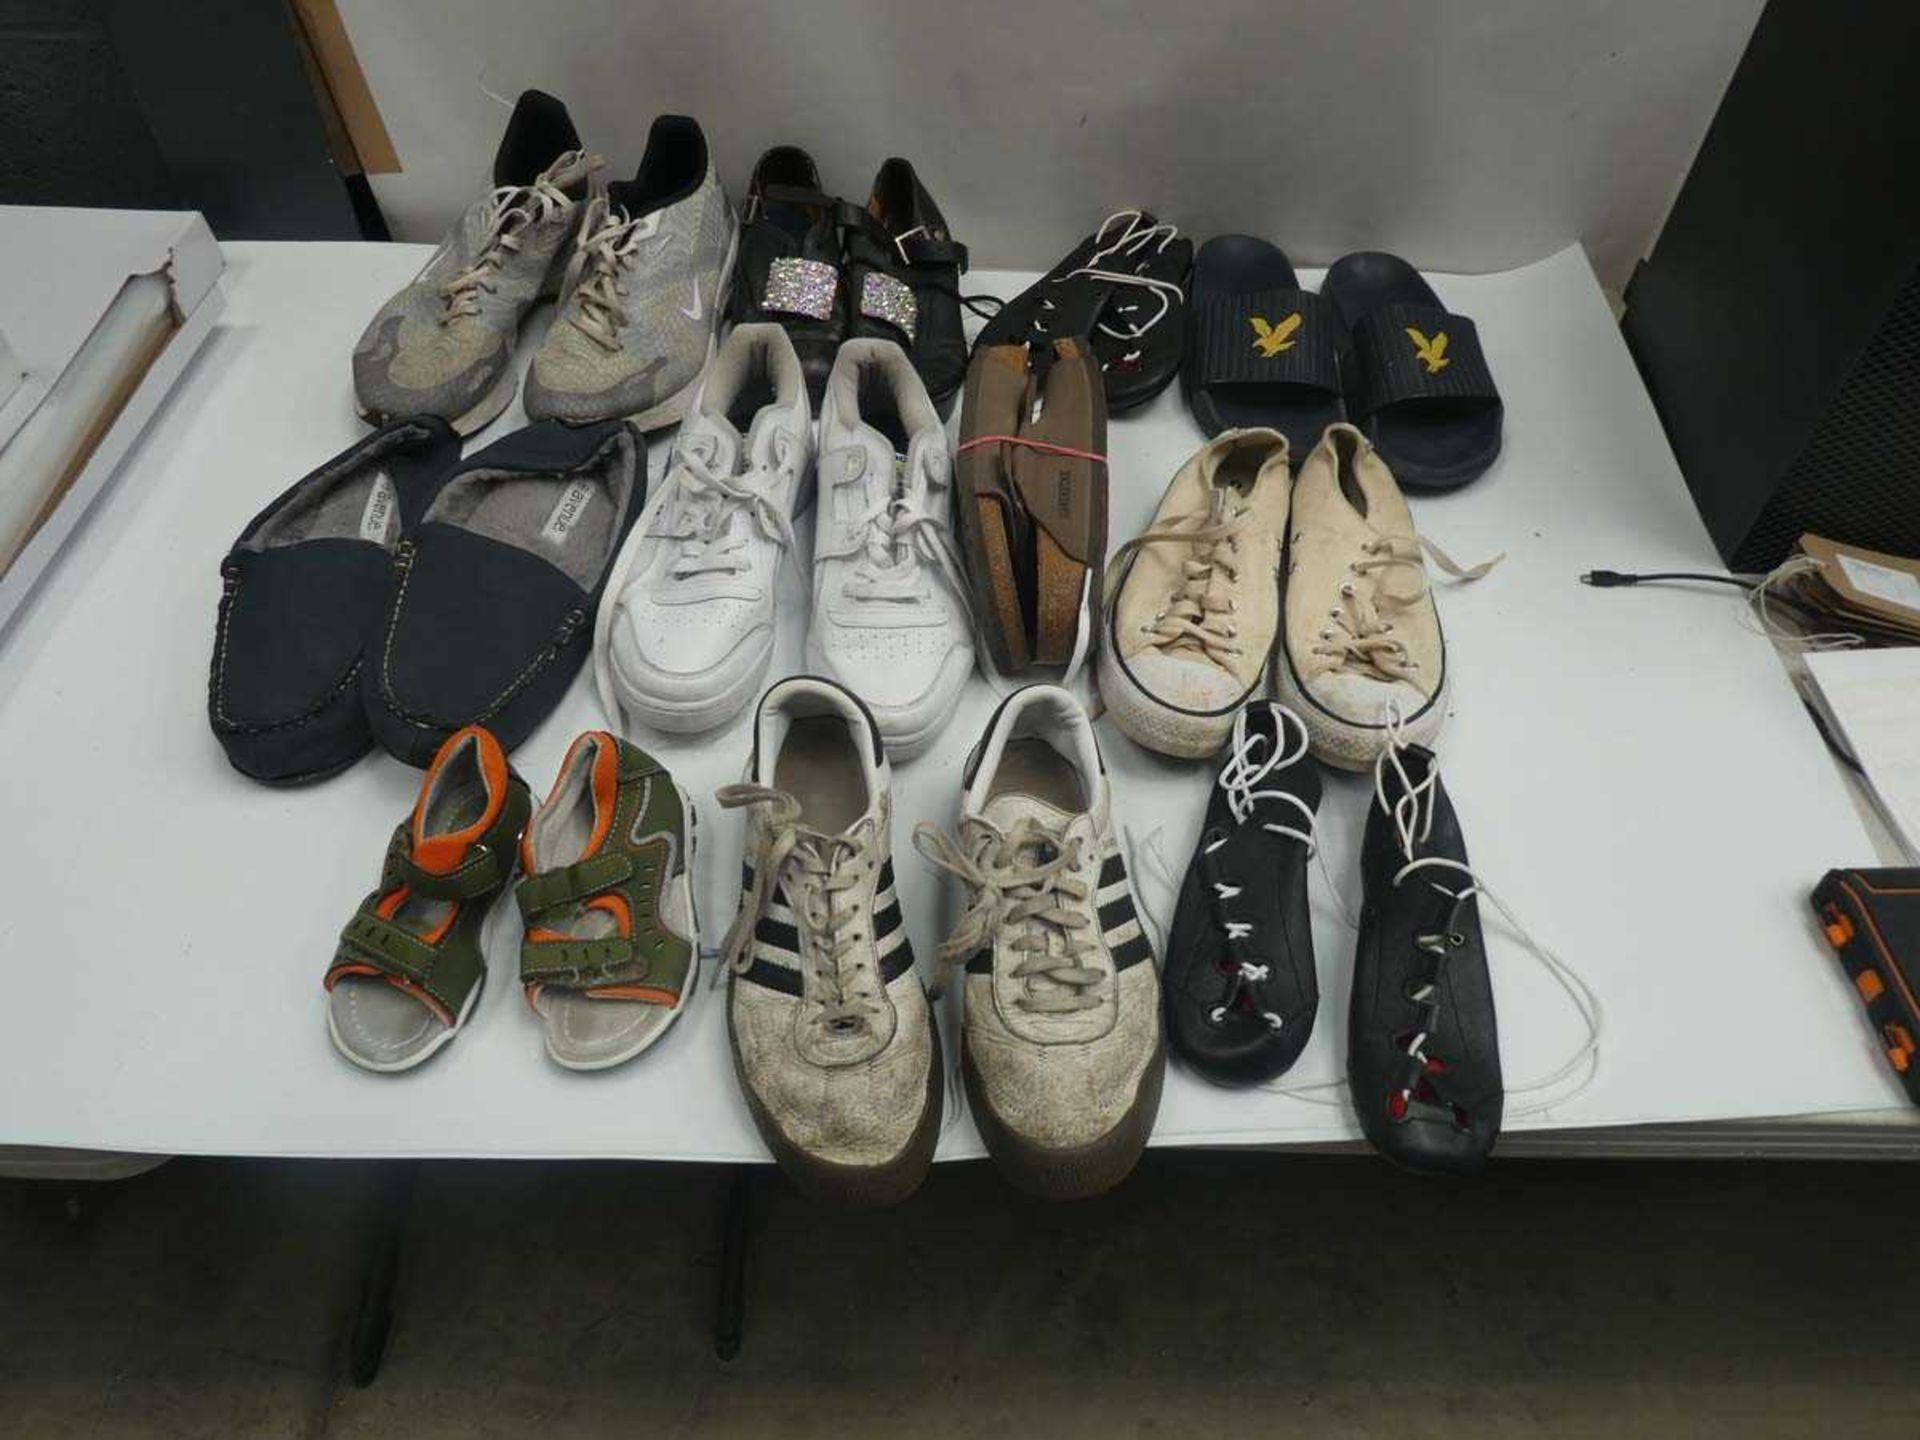 +VAT USED - 11 pairs of mixed shoes in various styles and sizes